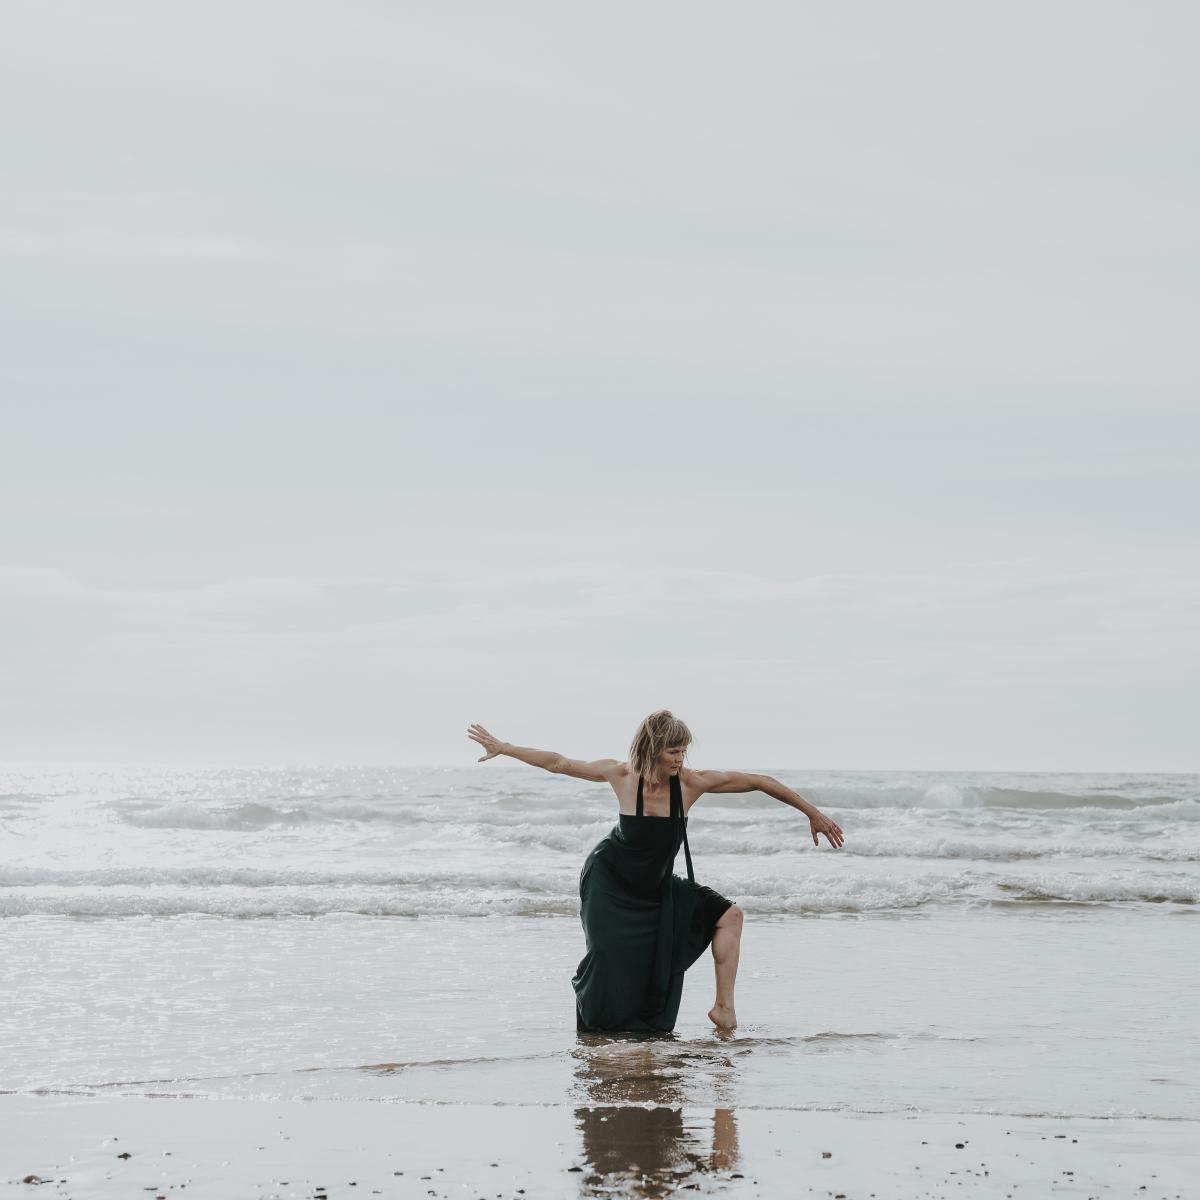 A woman in a black dress dances in the ocean waves on the beach